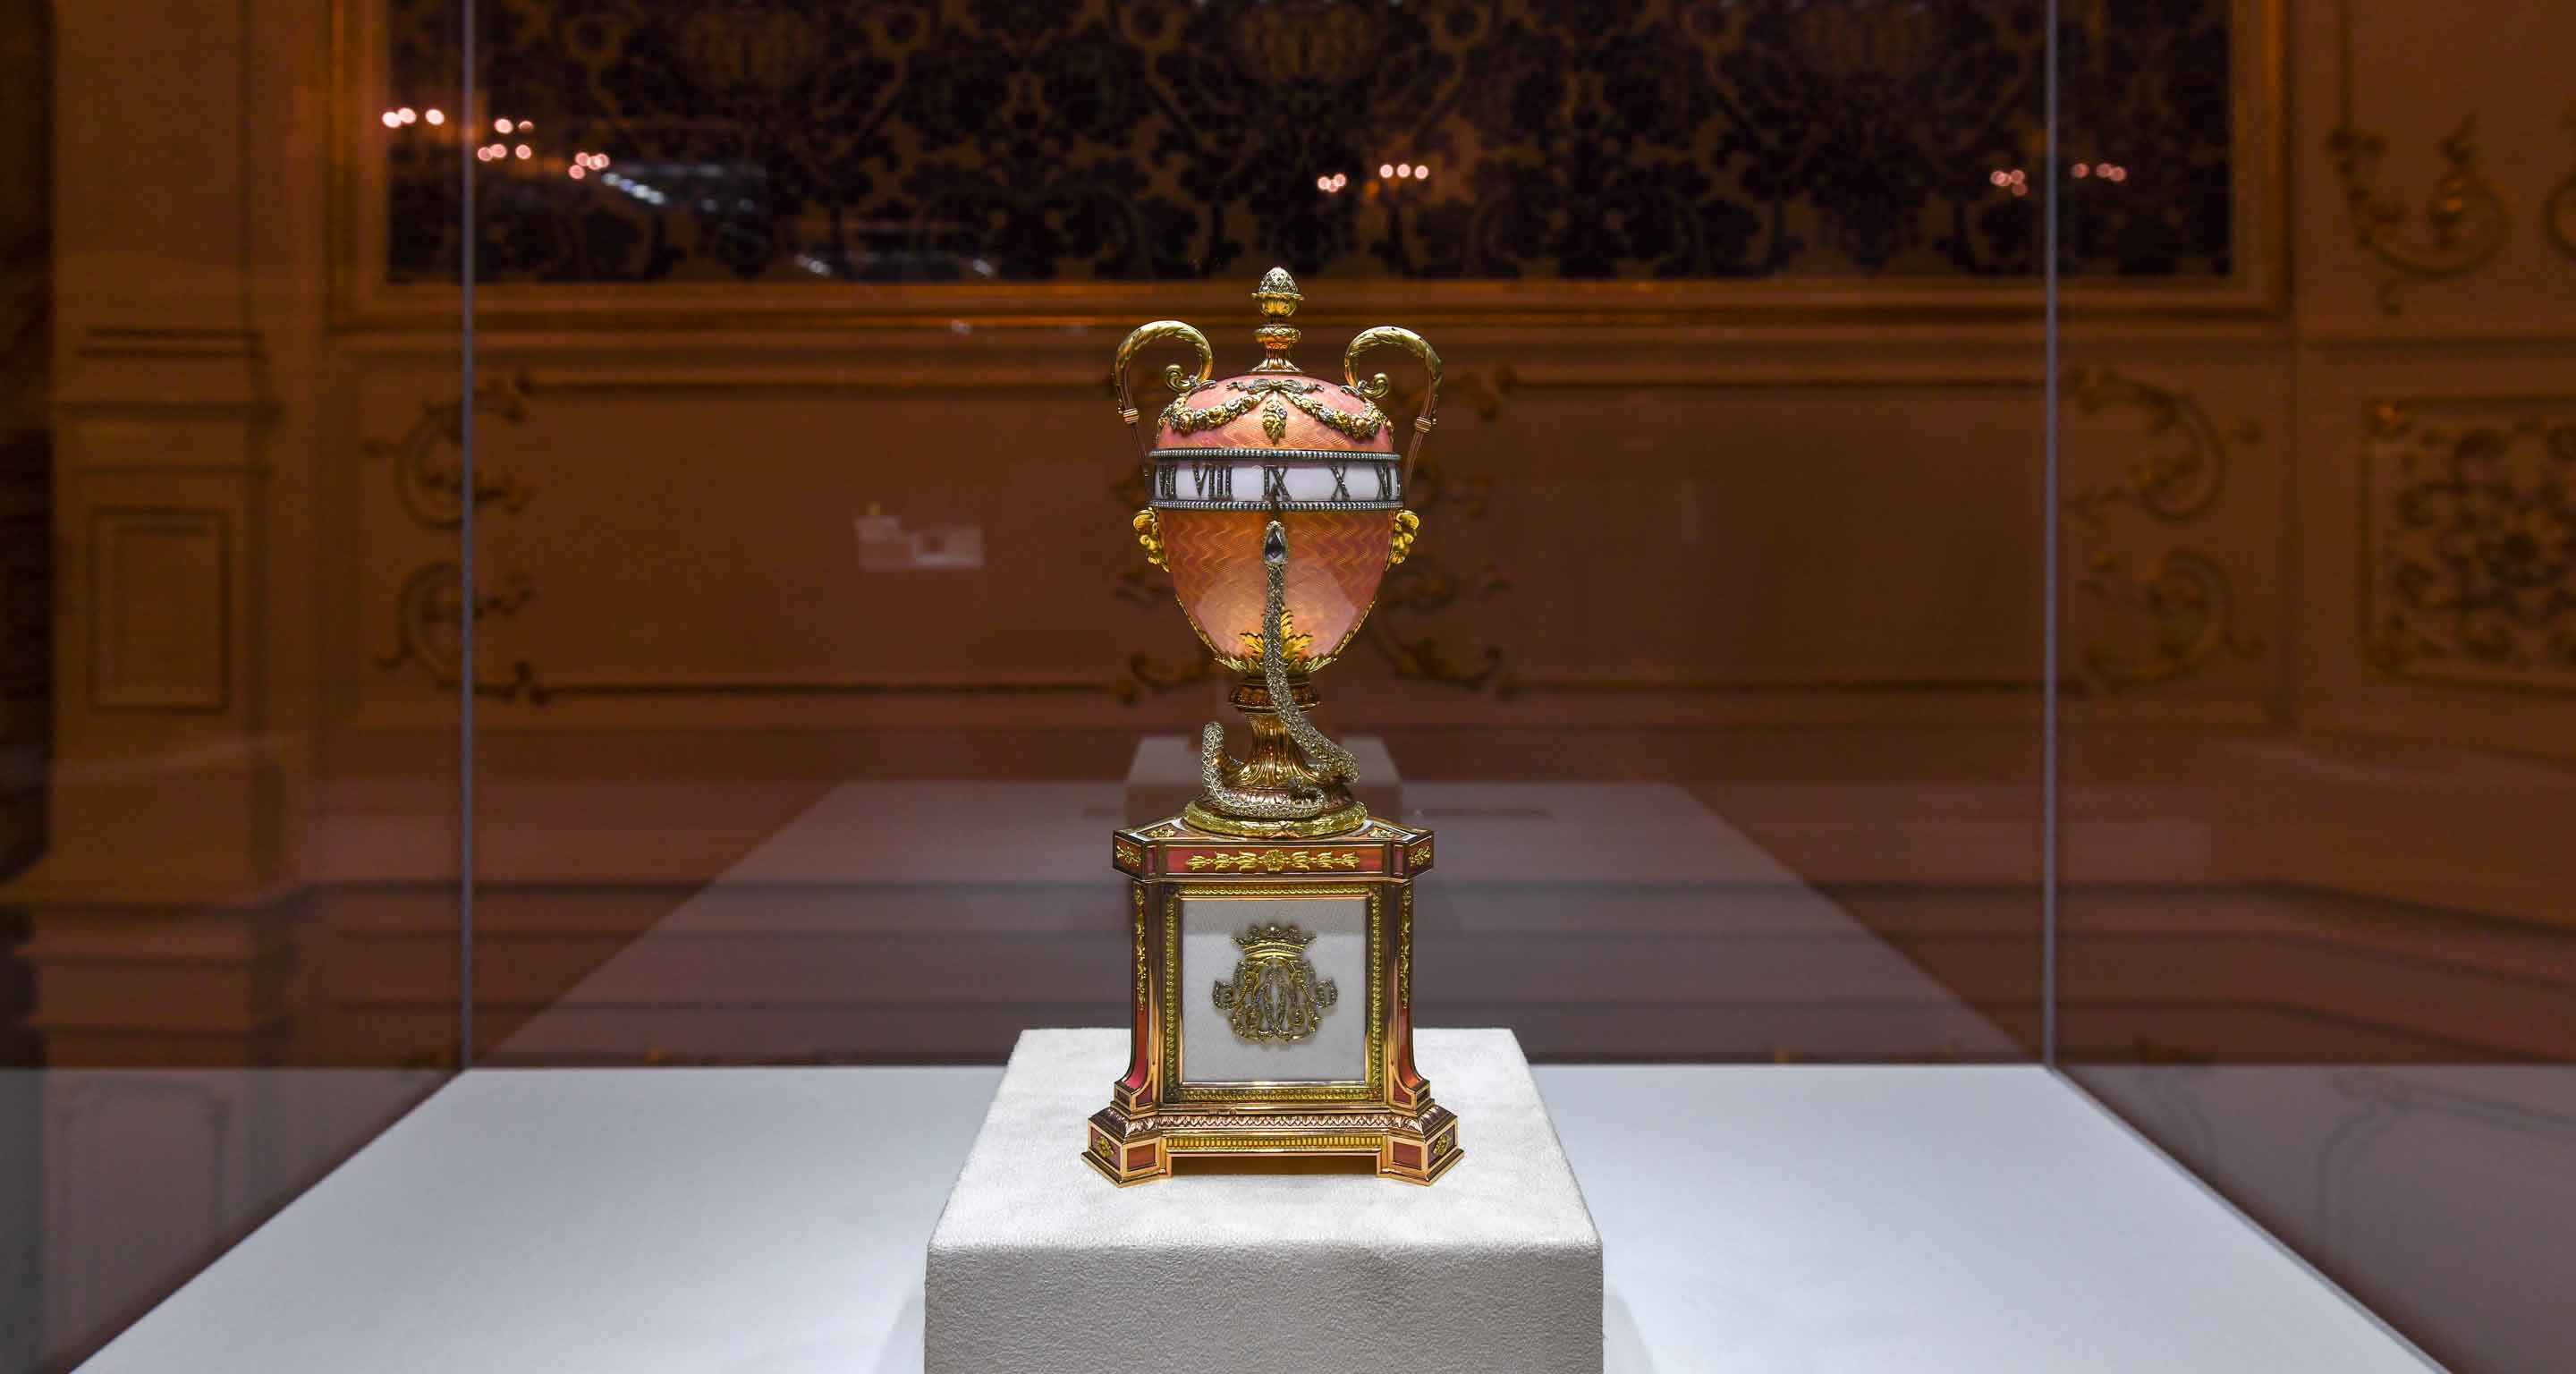 The Pink Serpent Egg at the Fabergé museum.